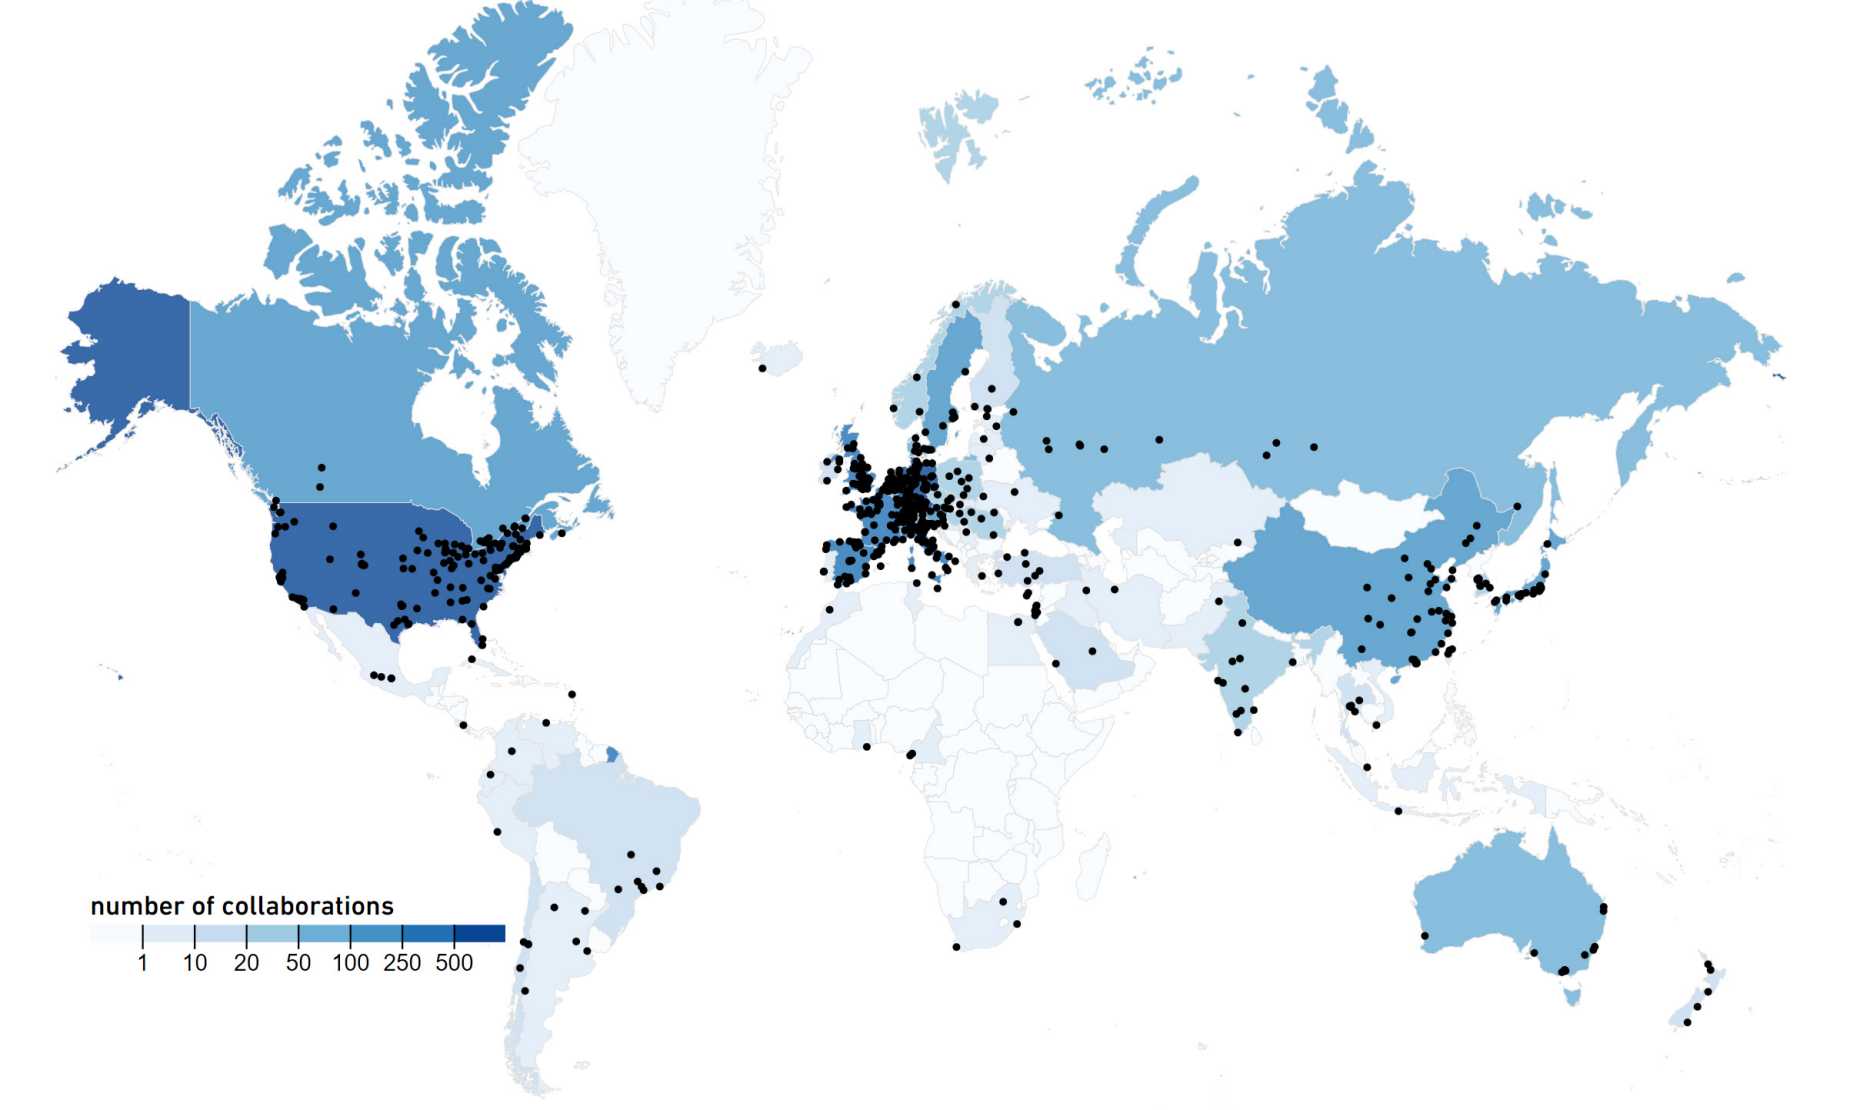 D-CHAB interactive map of collaborations